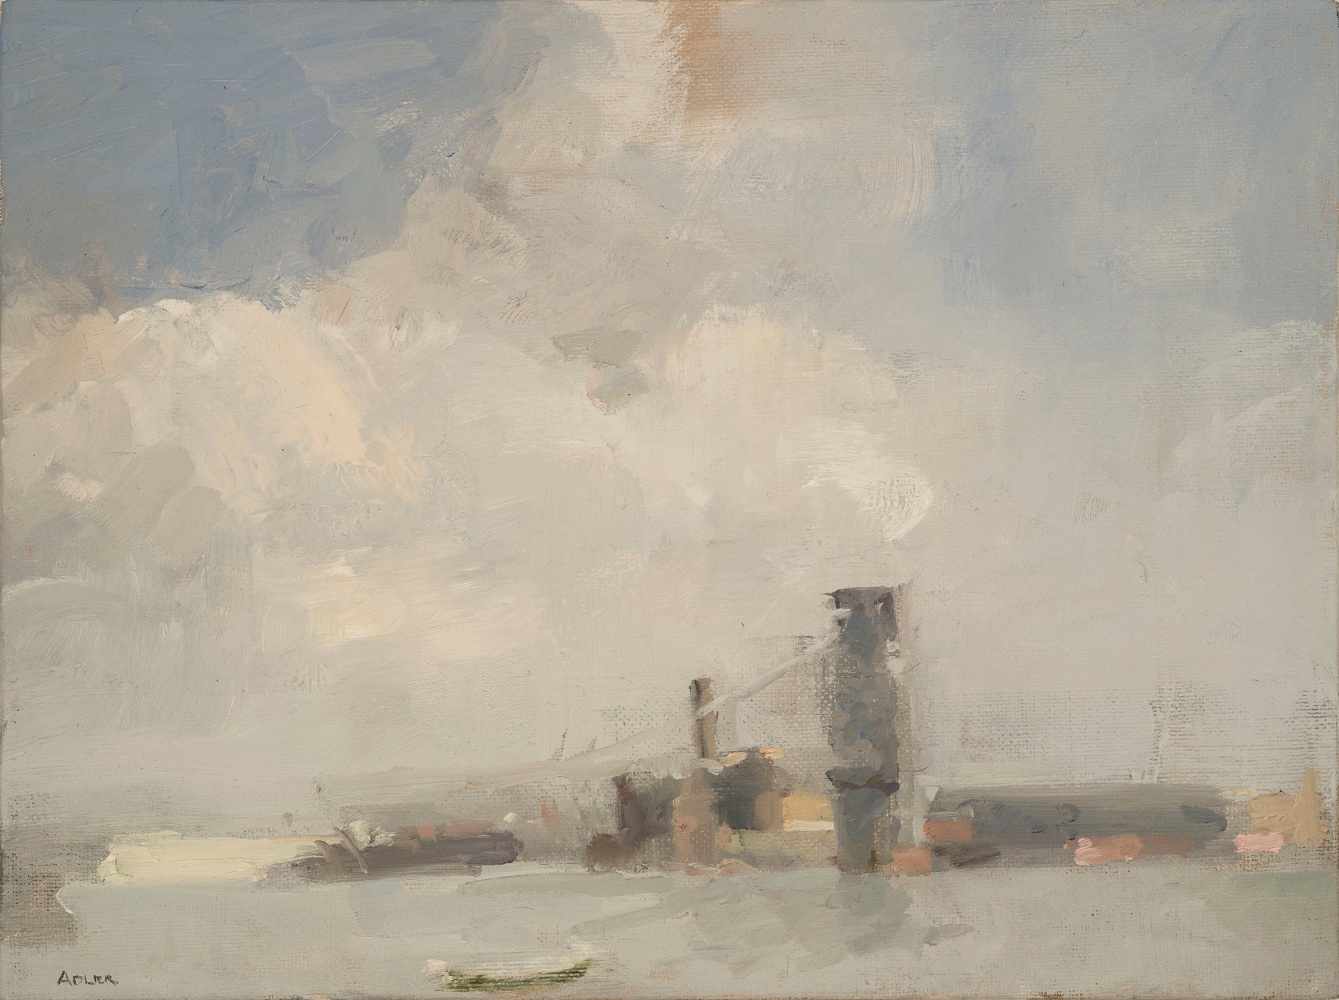 Laura Adler East River Buildings and Cloud Cover, 2013 oil on canvas 8 x 10 in.